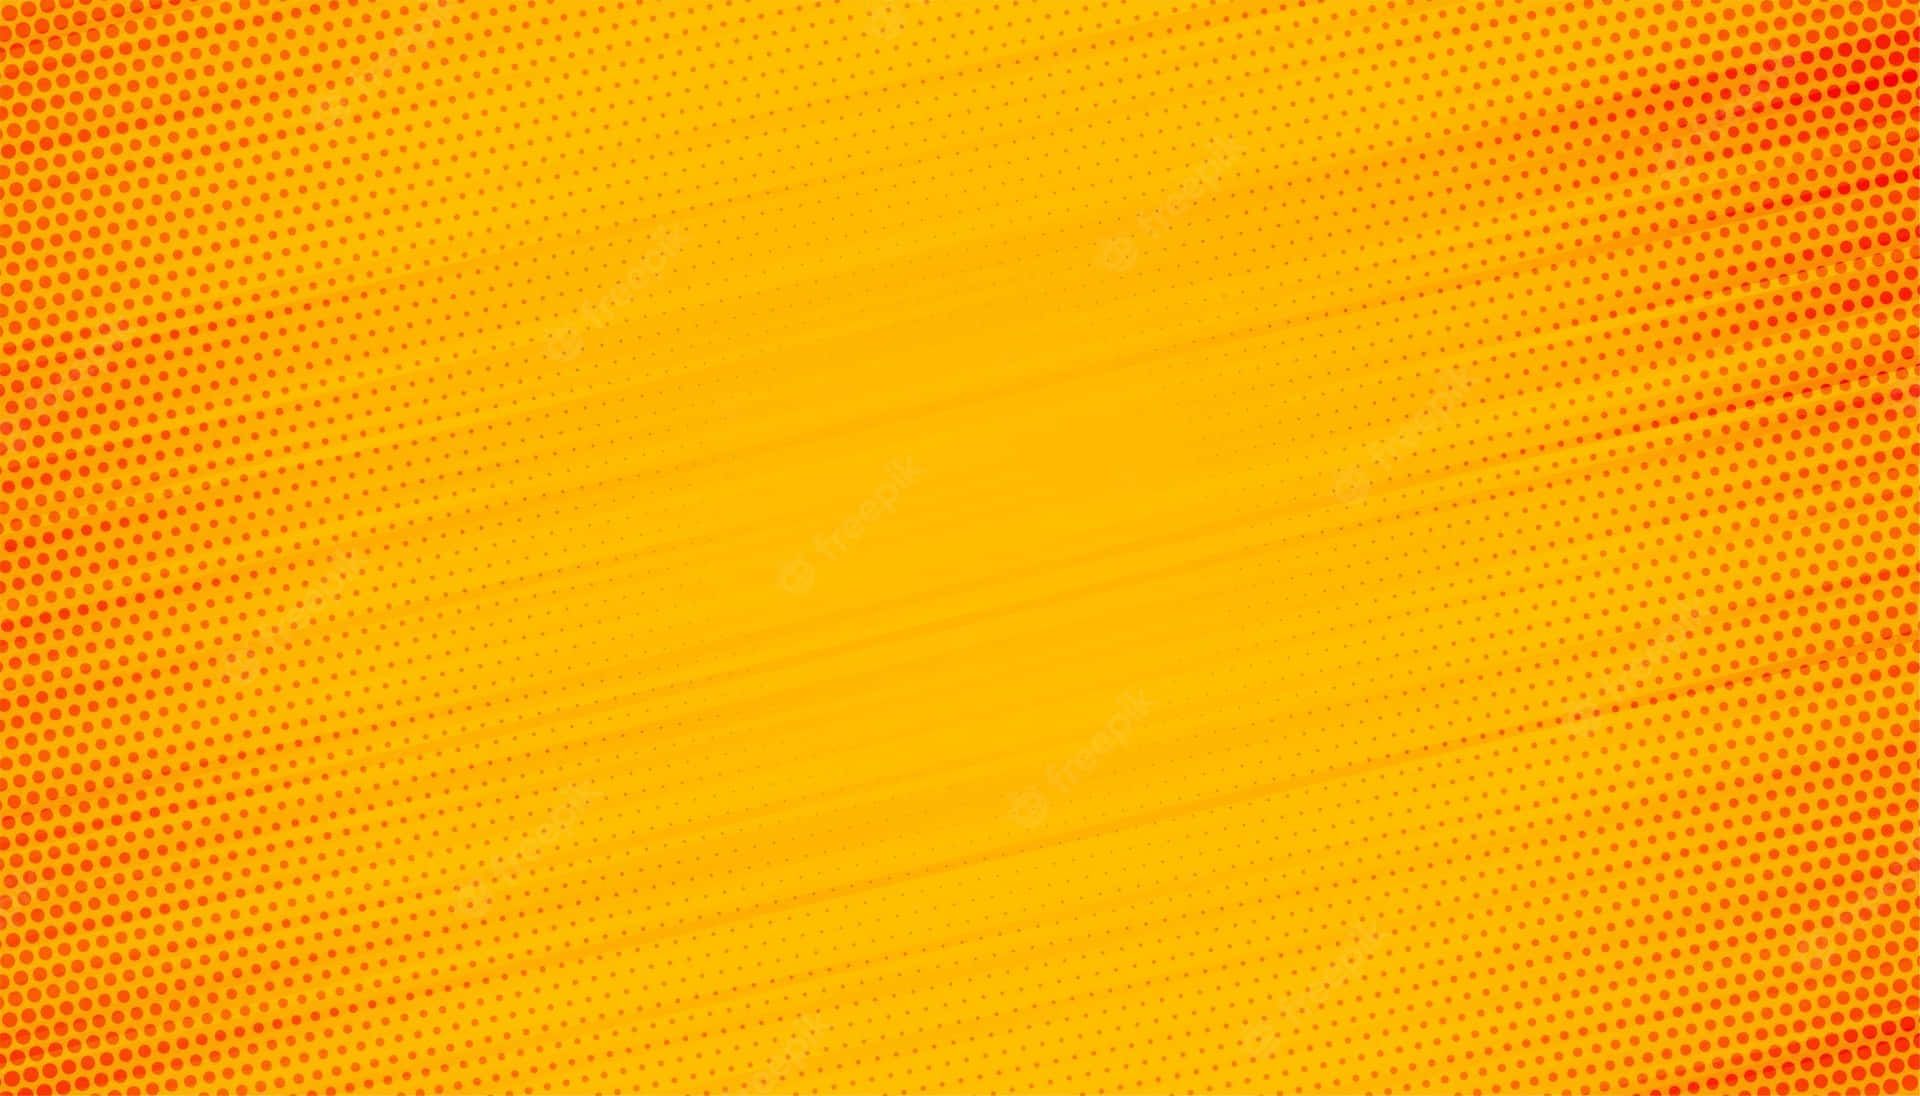 An Orange And Yellow Background With Stripes Wallpaper